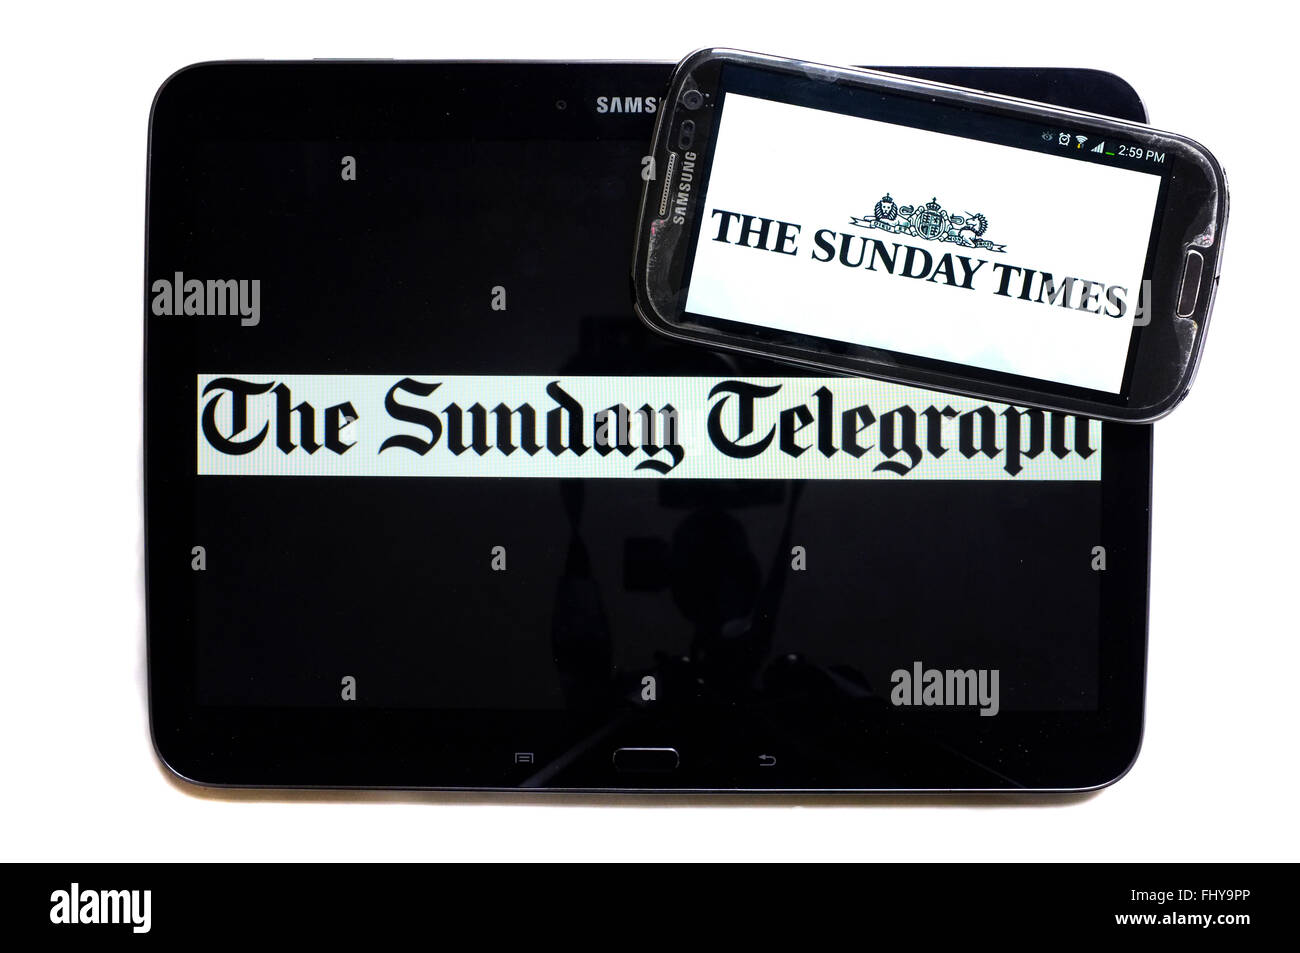 The logos of The Sunday Telegraph and The Sunday Times newspapers displayed on the screens of a tablet and a smartphone. Stock Photo